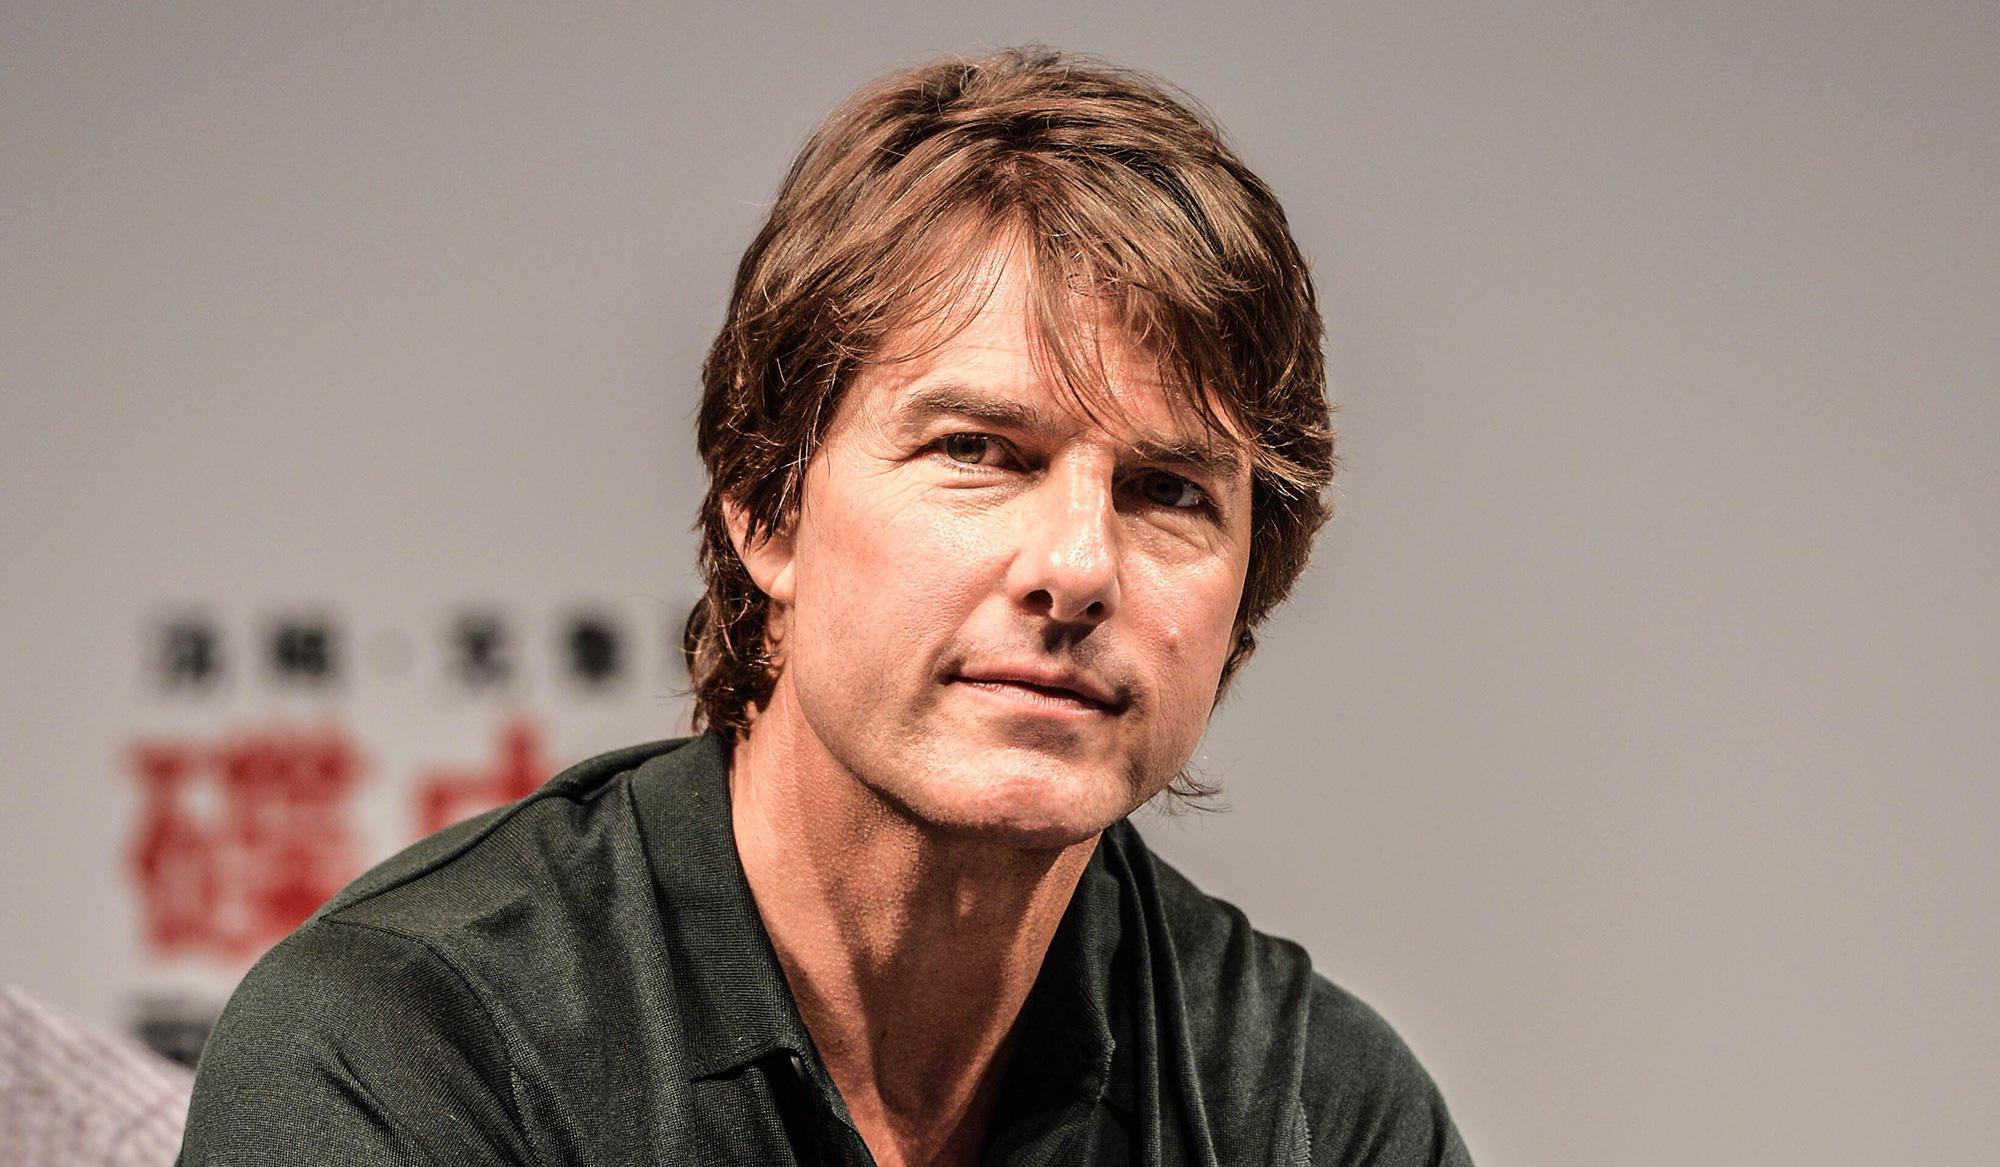 Tom Cruise is one of Scientology's most well-known advocates